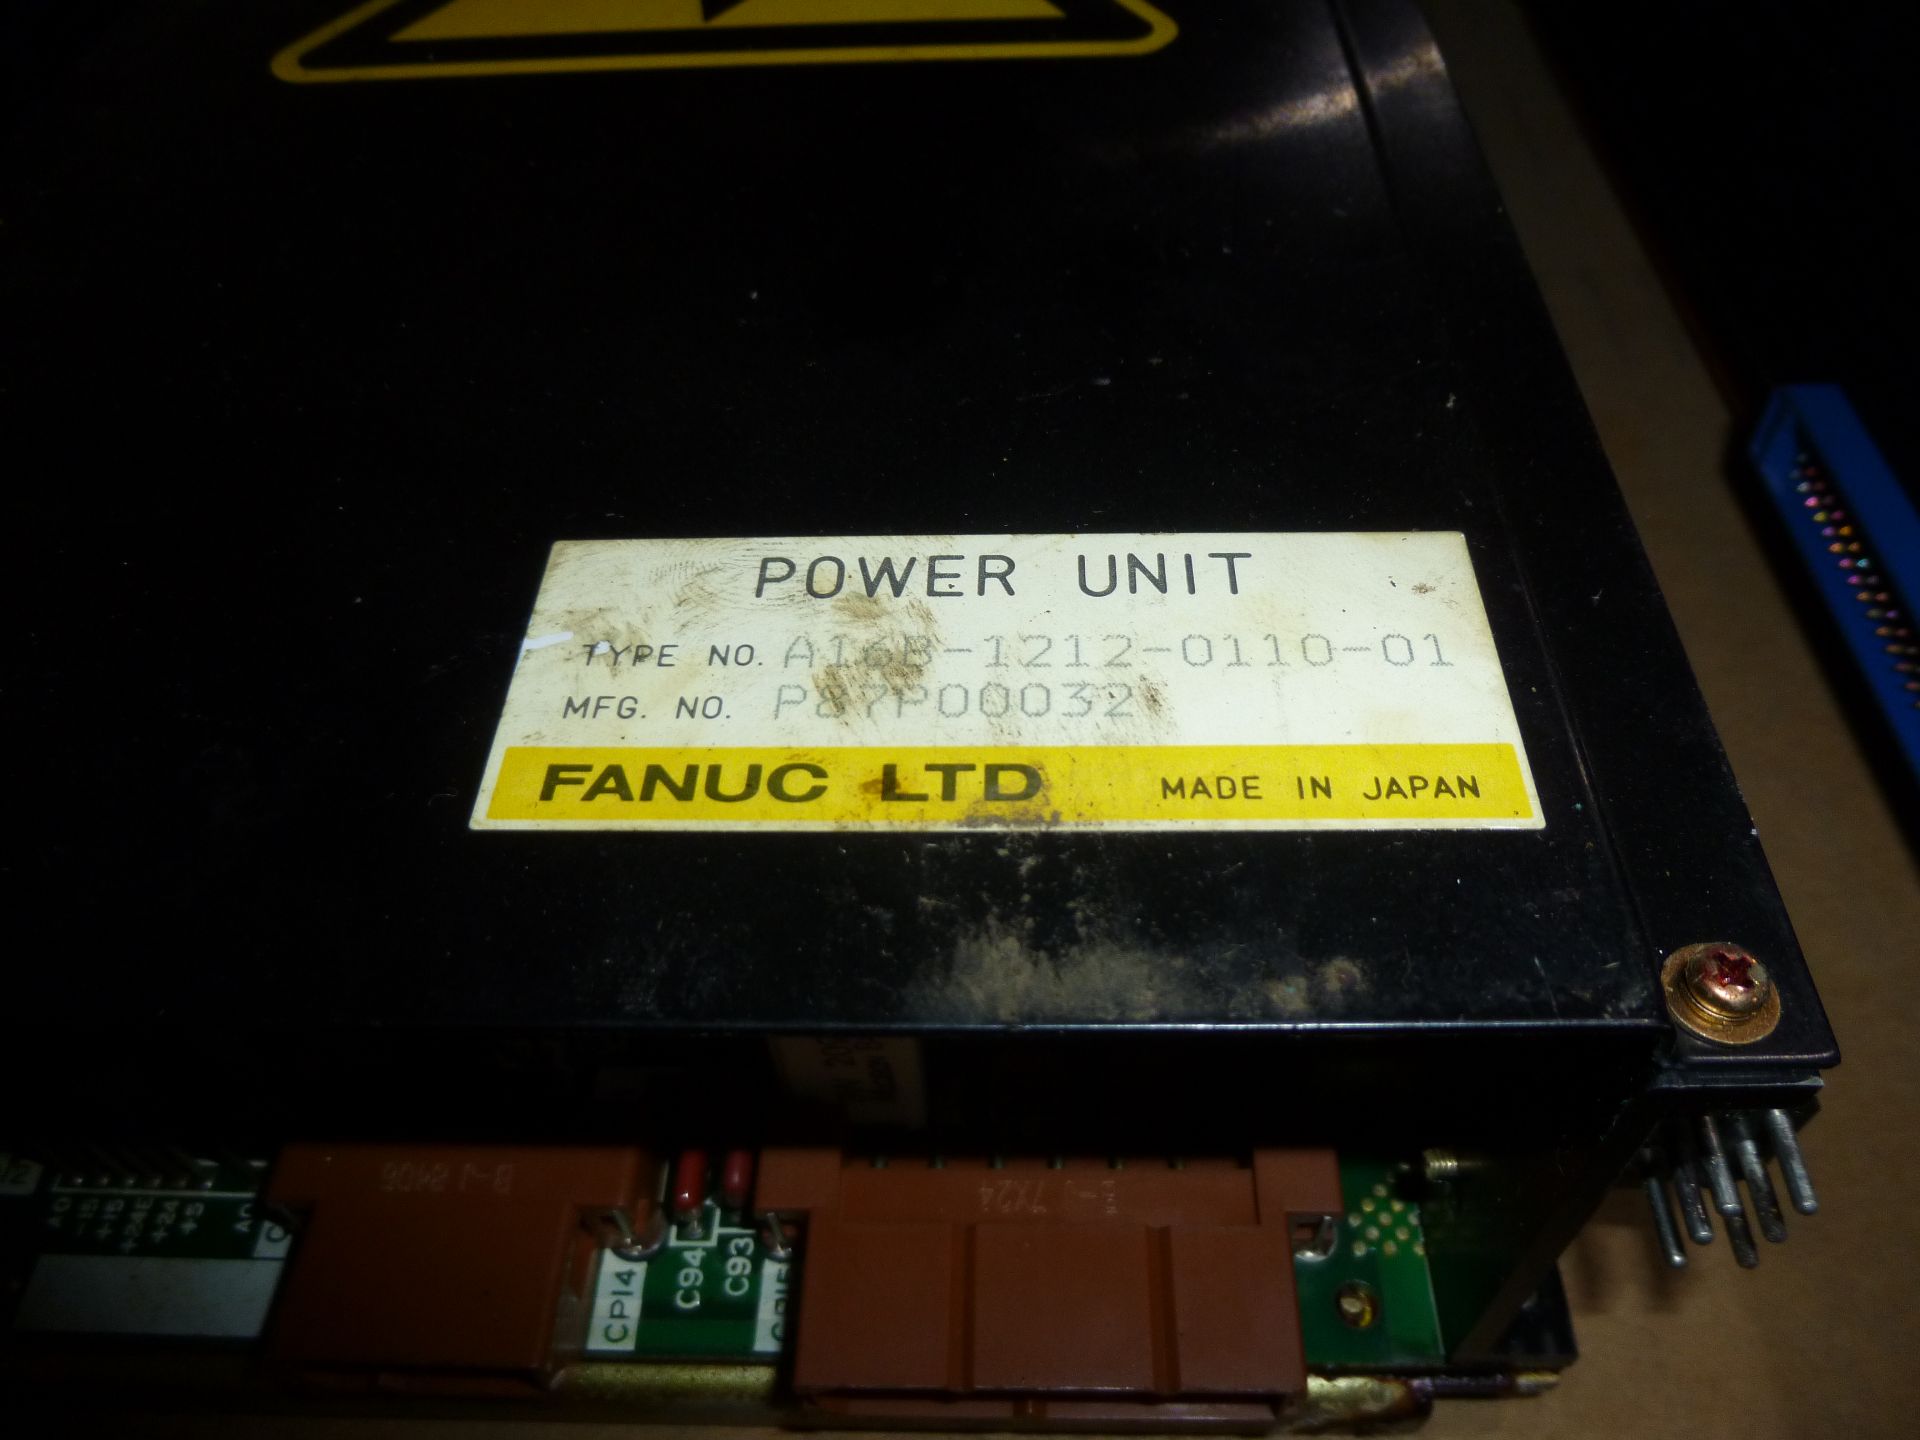 Fanuc power unit model A16B-1212-0110-01, as always with Brolyn LLC auctions, all lots can be picked - Image 2 of 3